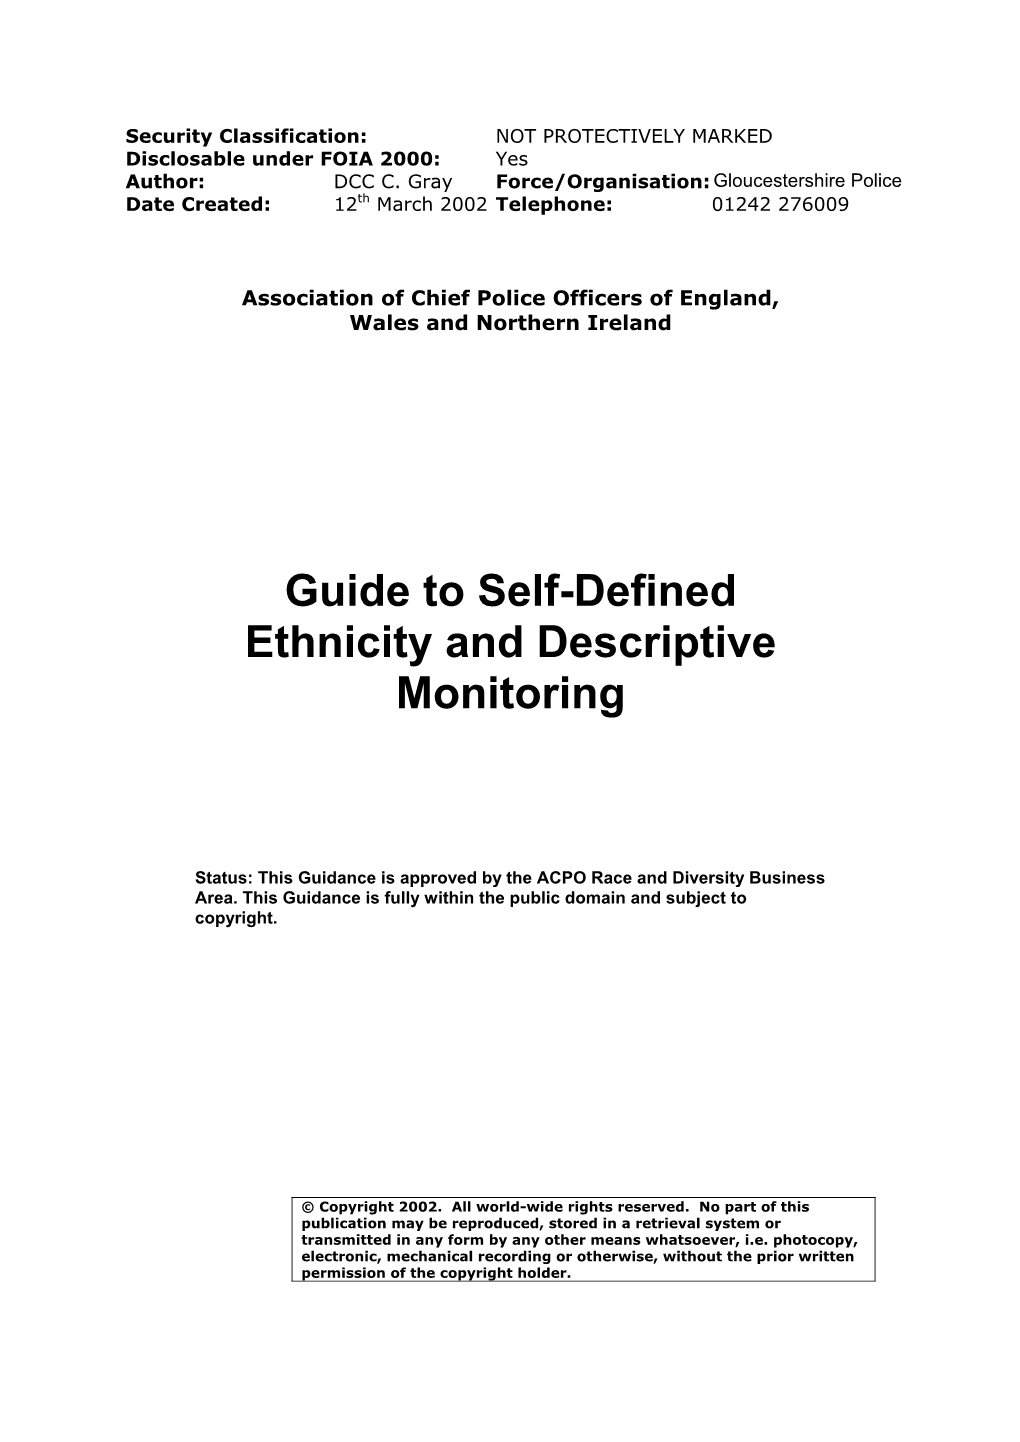 Guide to Self-Defined Ethnicity and Descriptive Monitoring